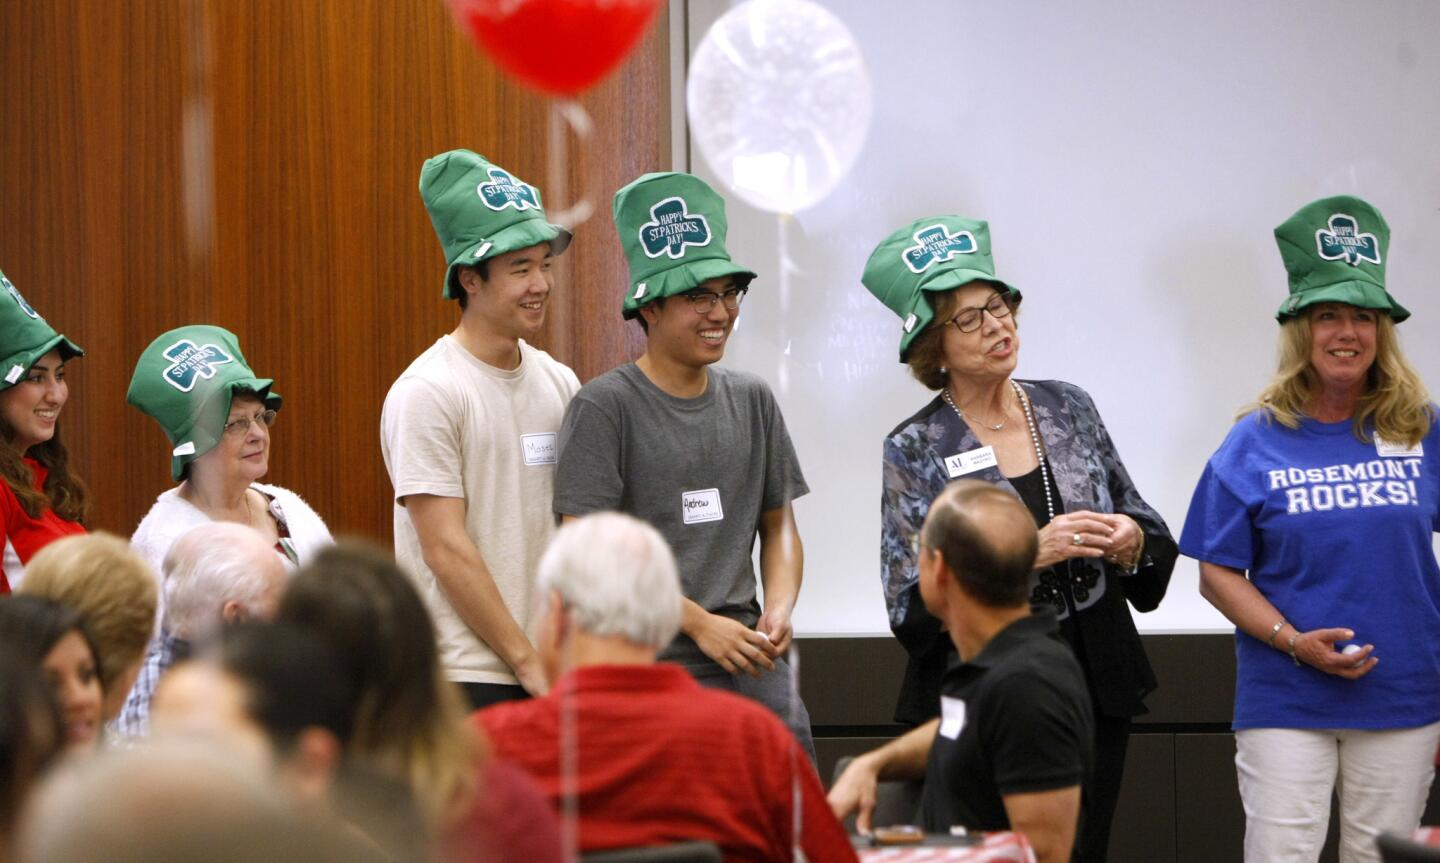 Photo Gallery: Crescenta Valley Chamber of Commerce's 29th annual Smart-A-Thon